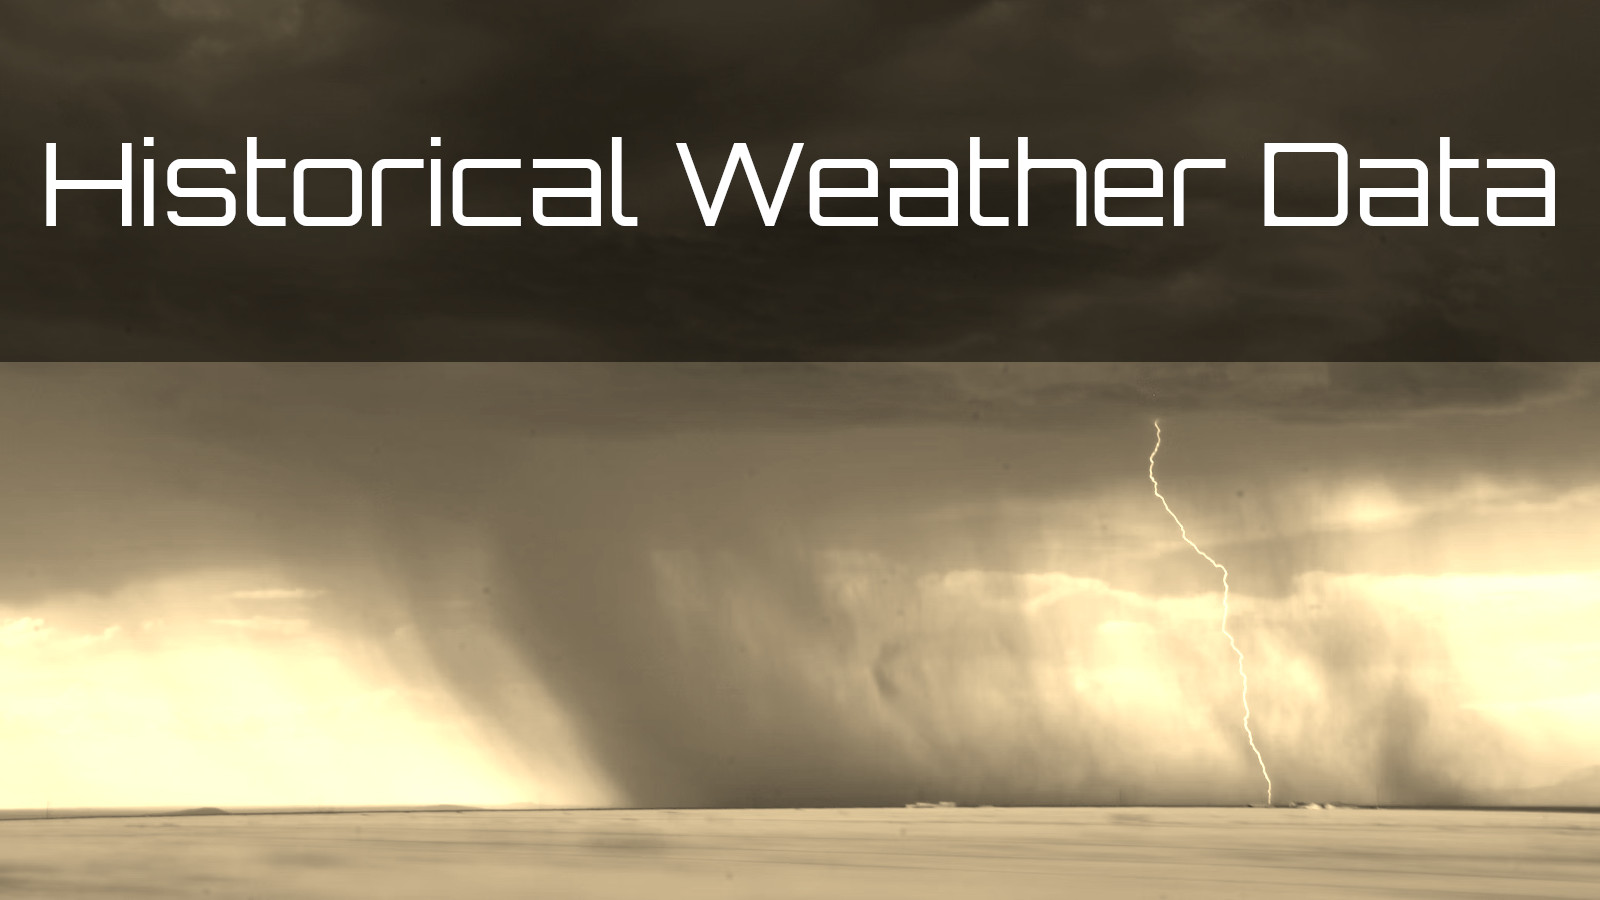 Historical Weather Data